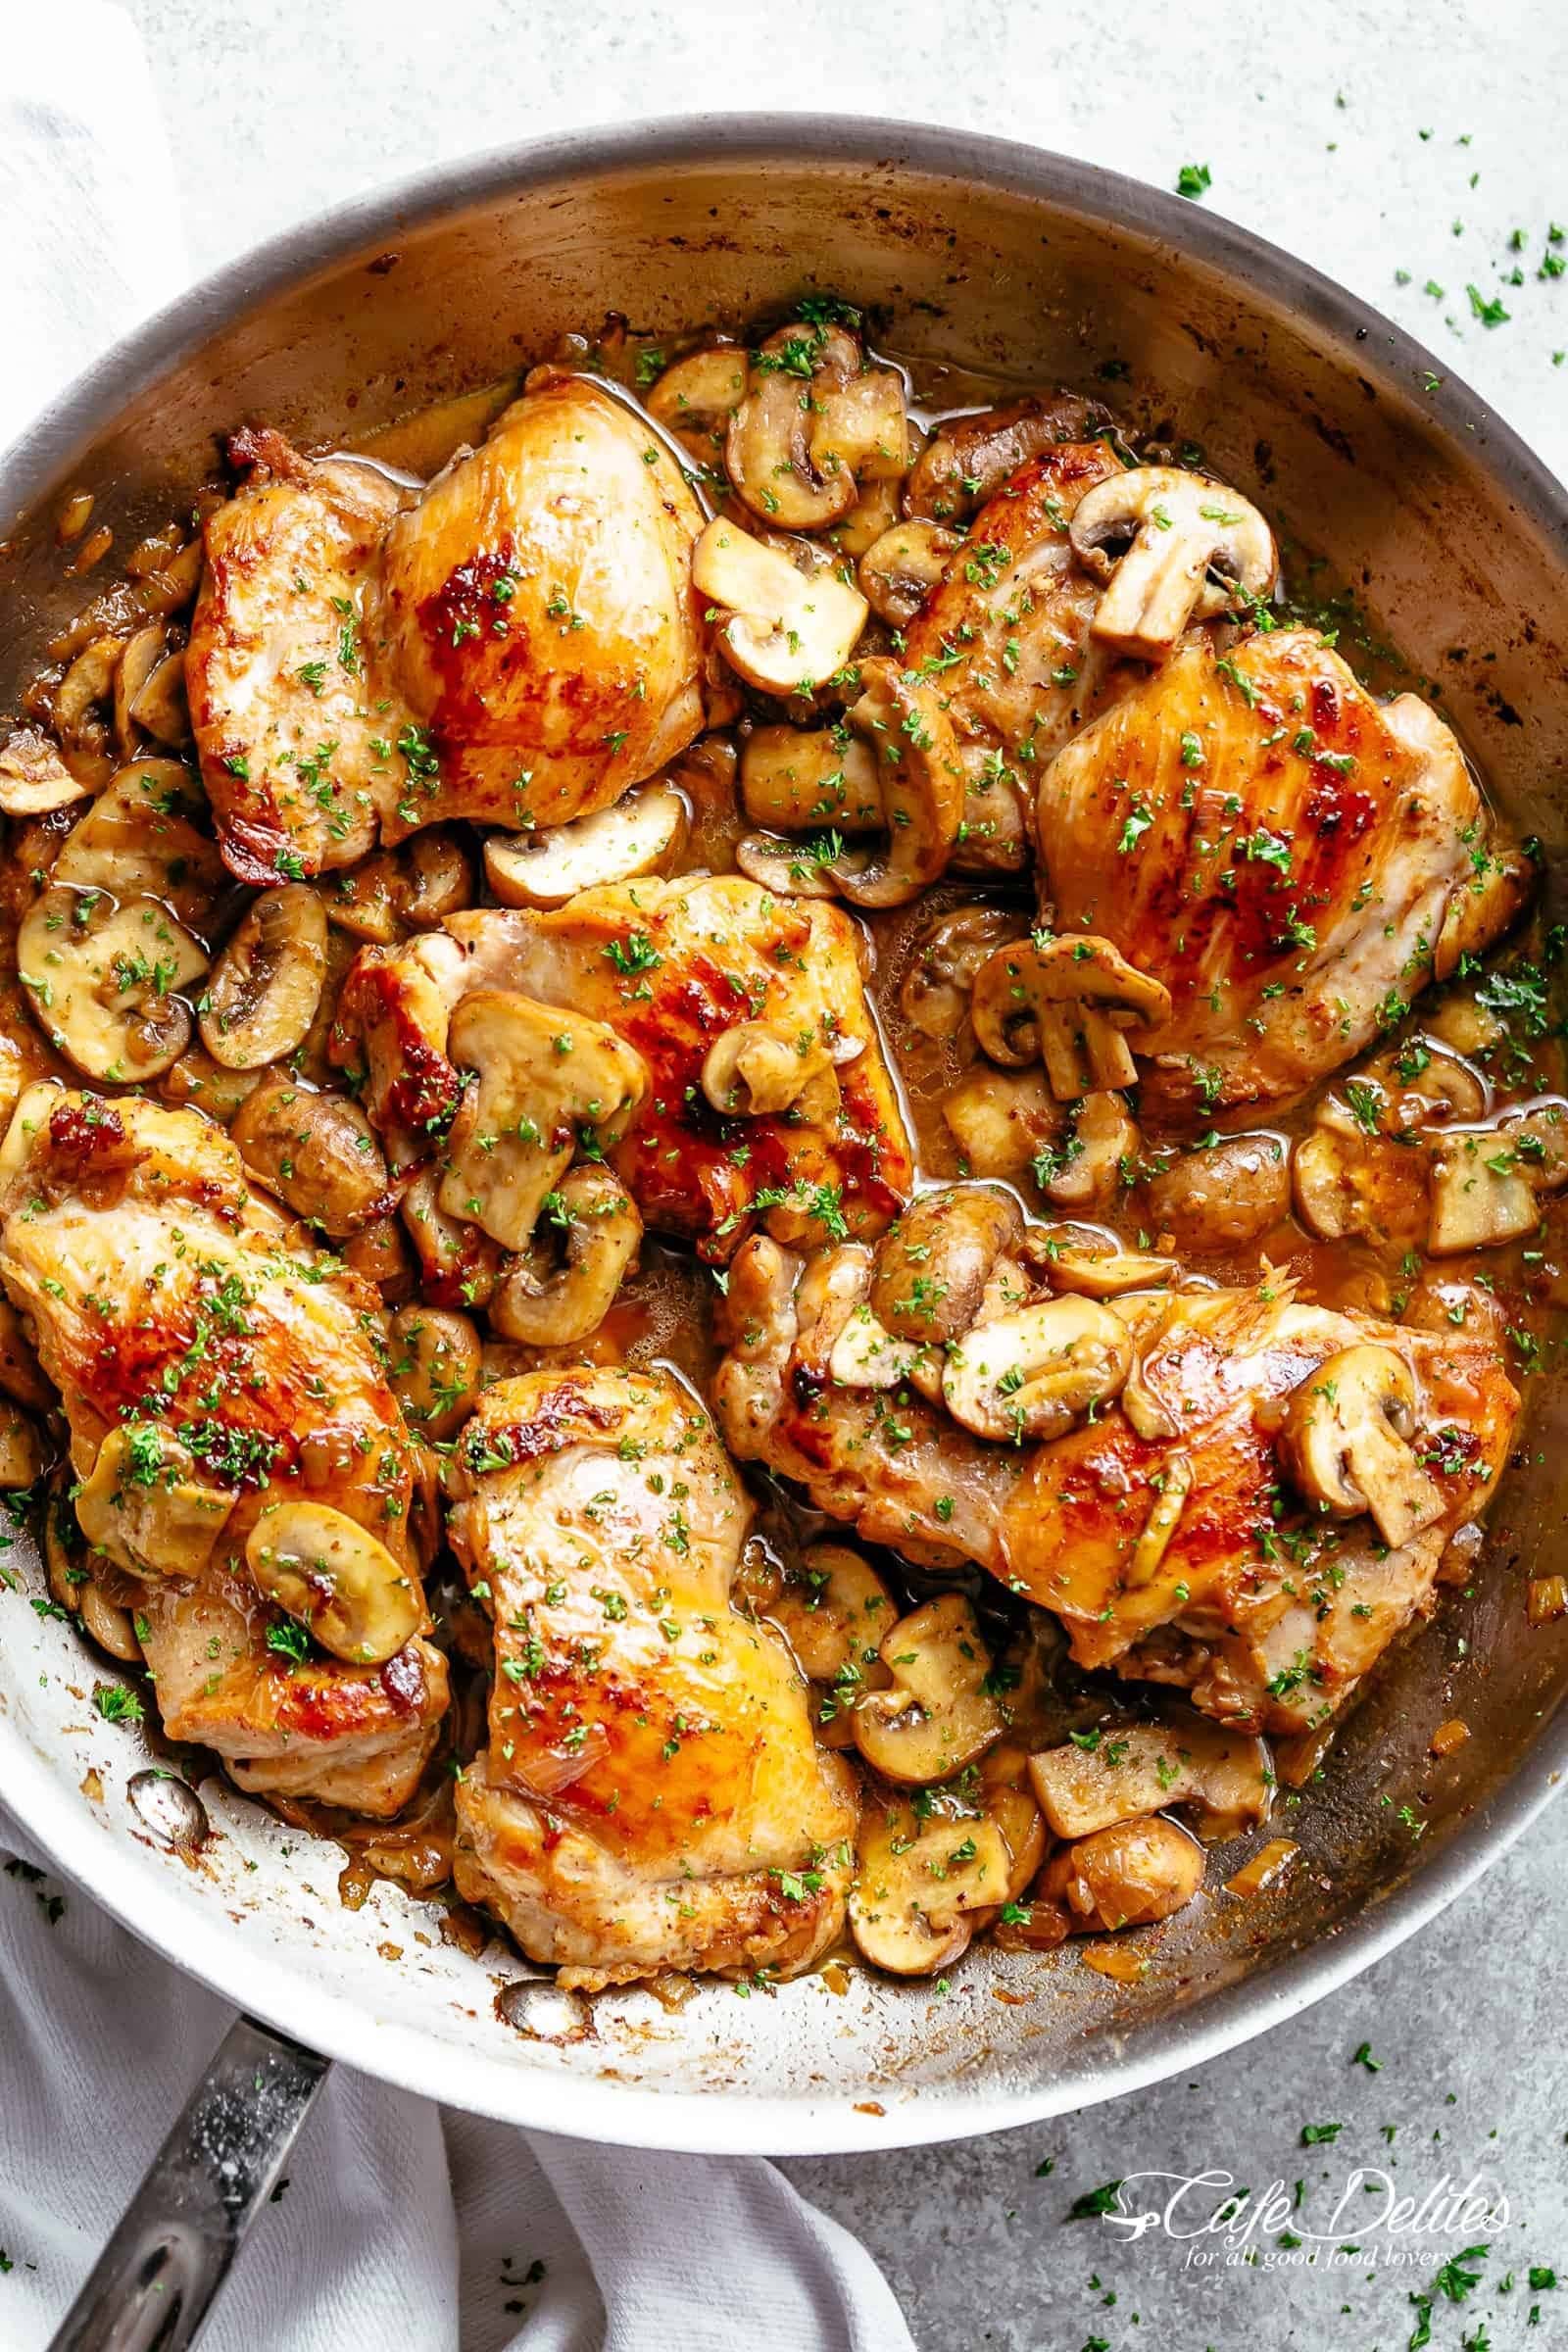 Homemade herb-infused chicken and mushroom skillet dish